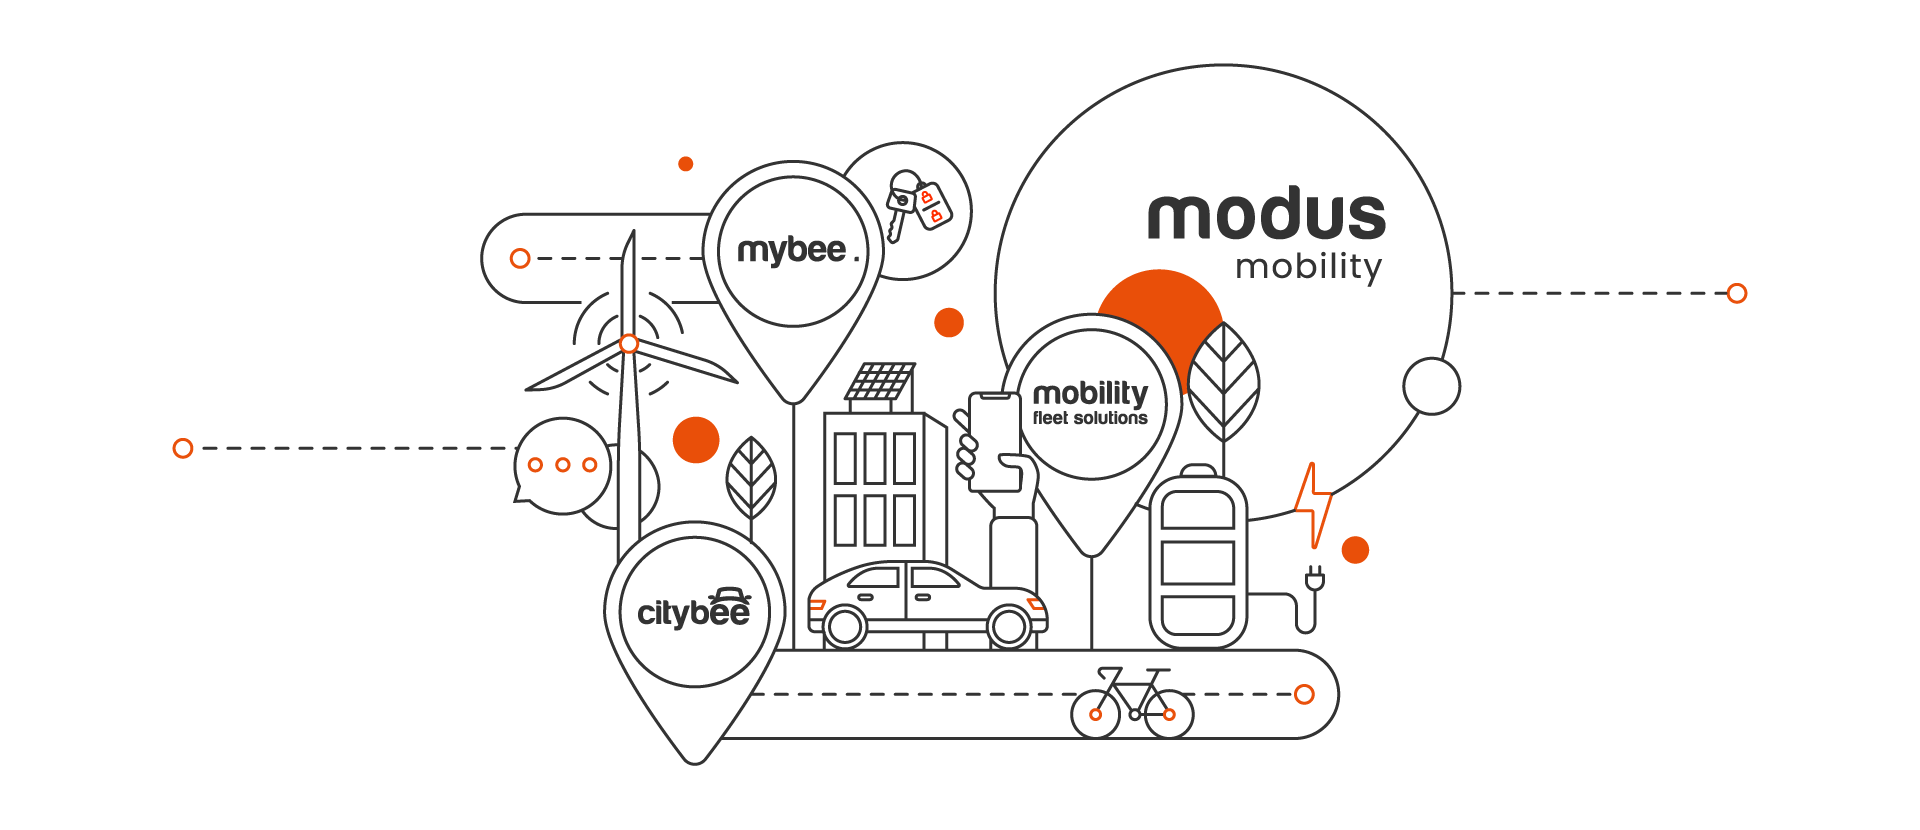 Modus Mobility Communications Project Manager